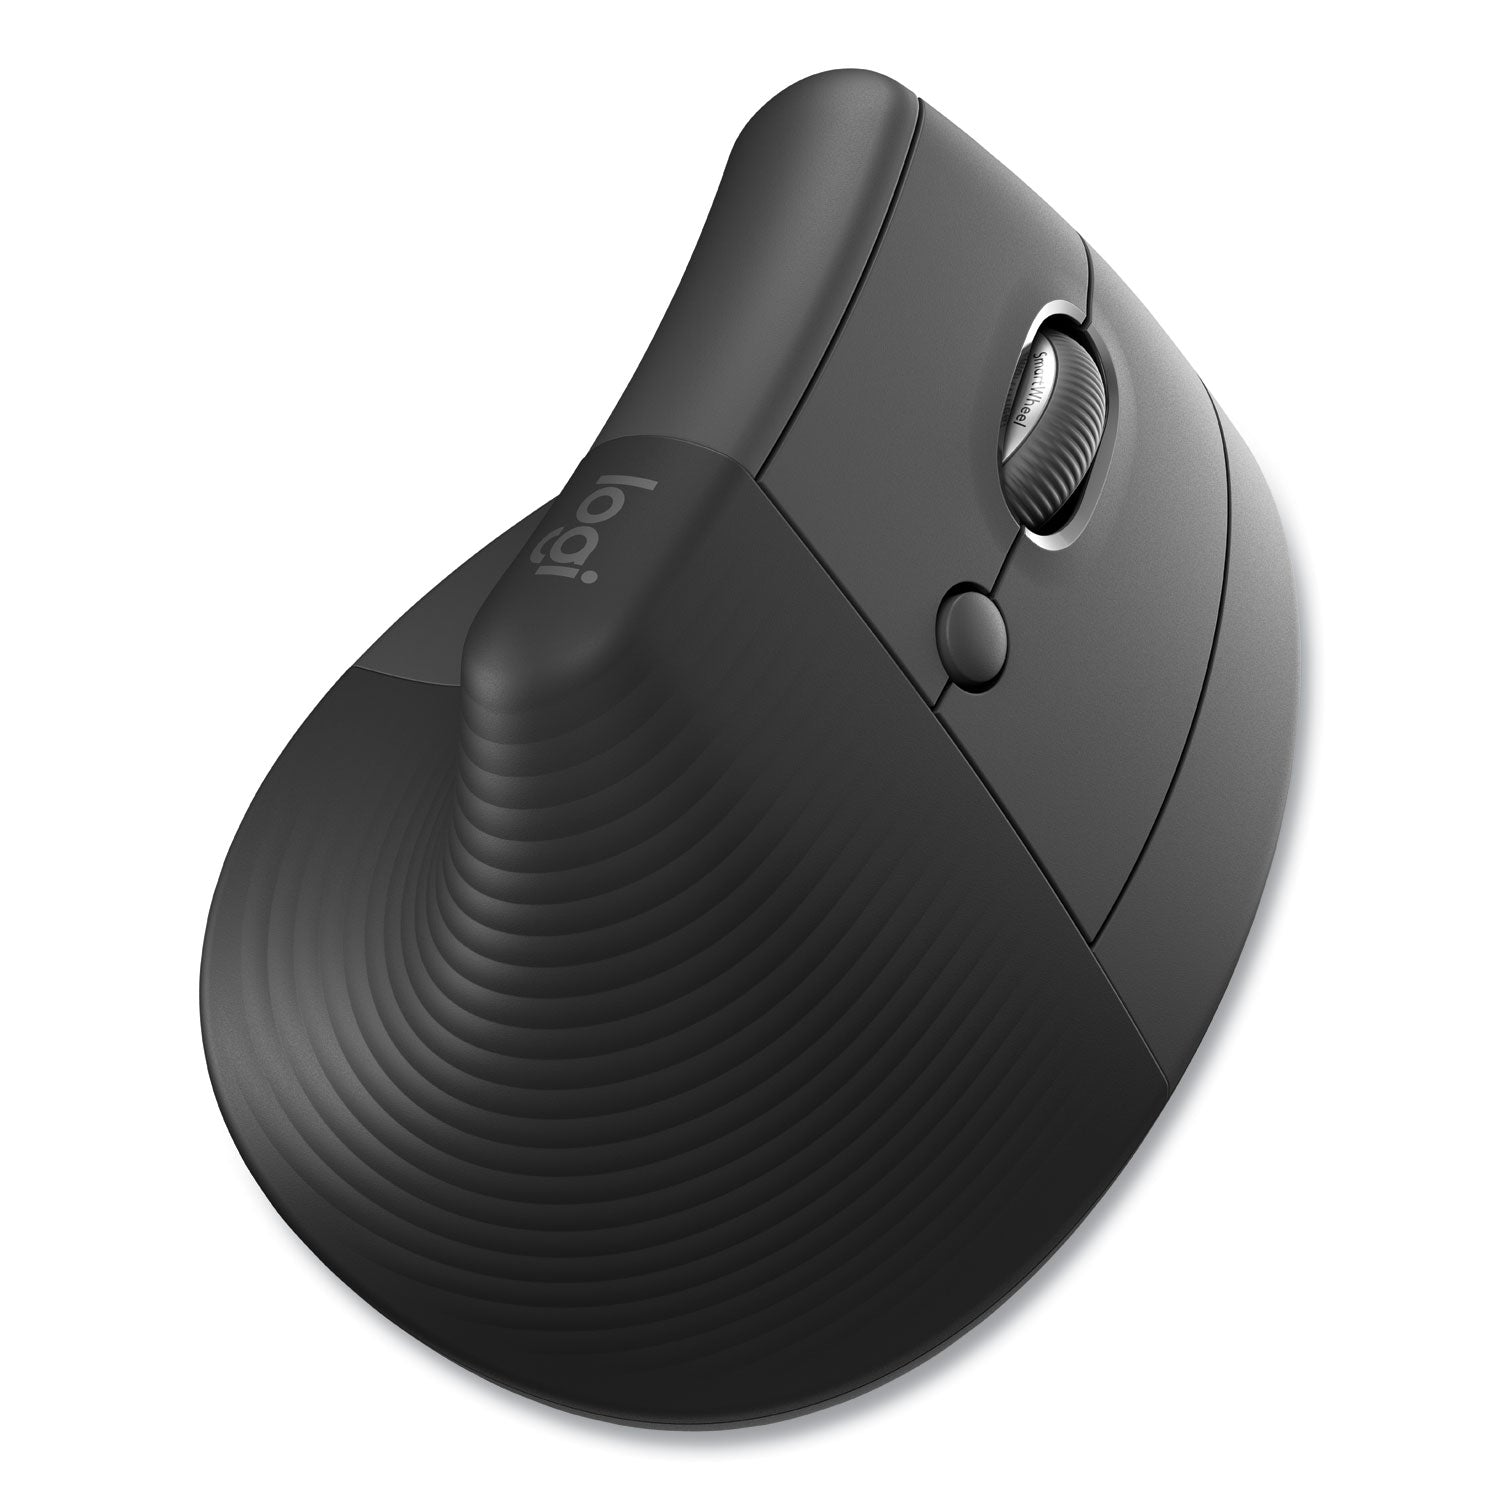 lift-for-business-vertical-ergonomic-mouse-24-ghz-frequency-32-ft-wireless-range-right-hand-use-graphite_log910006491 - 3